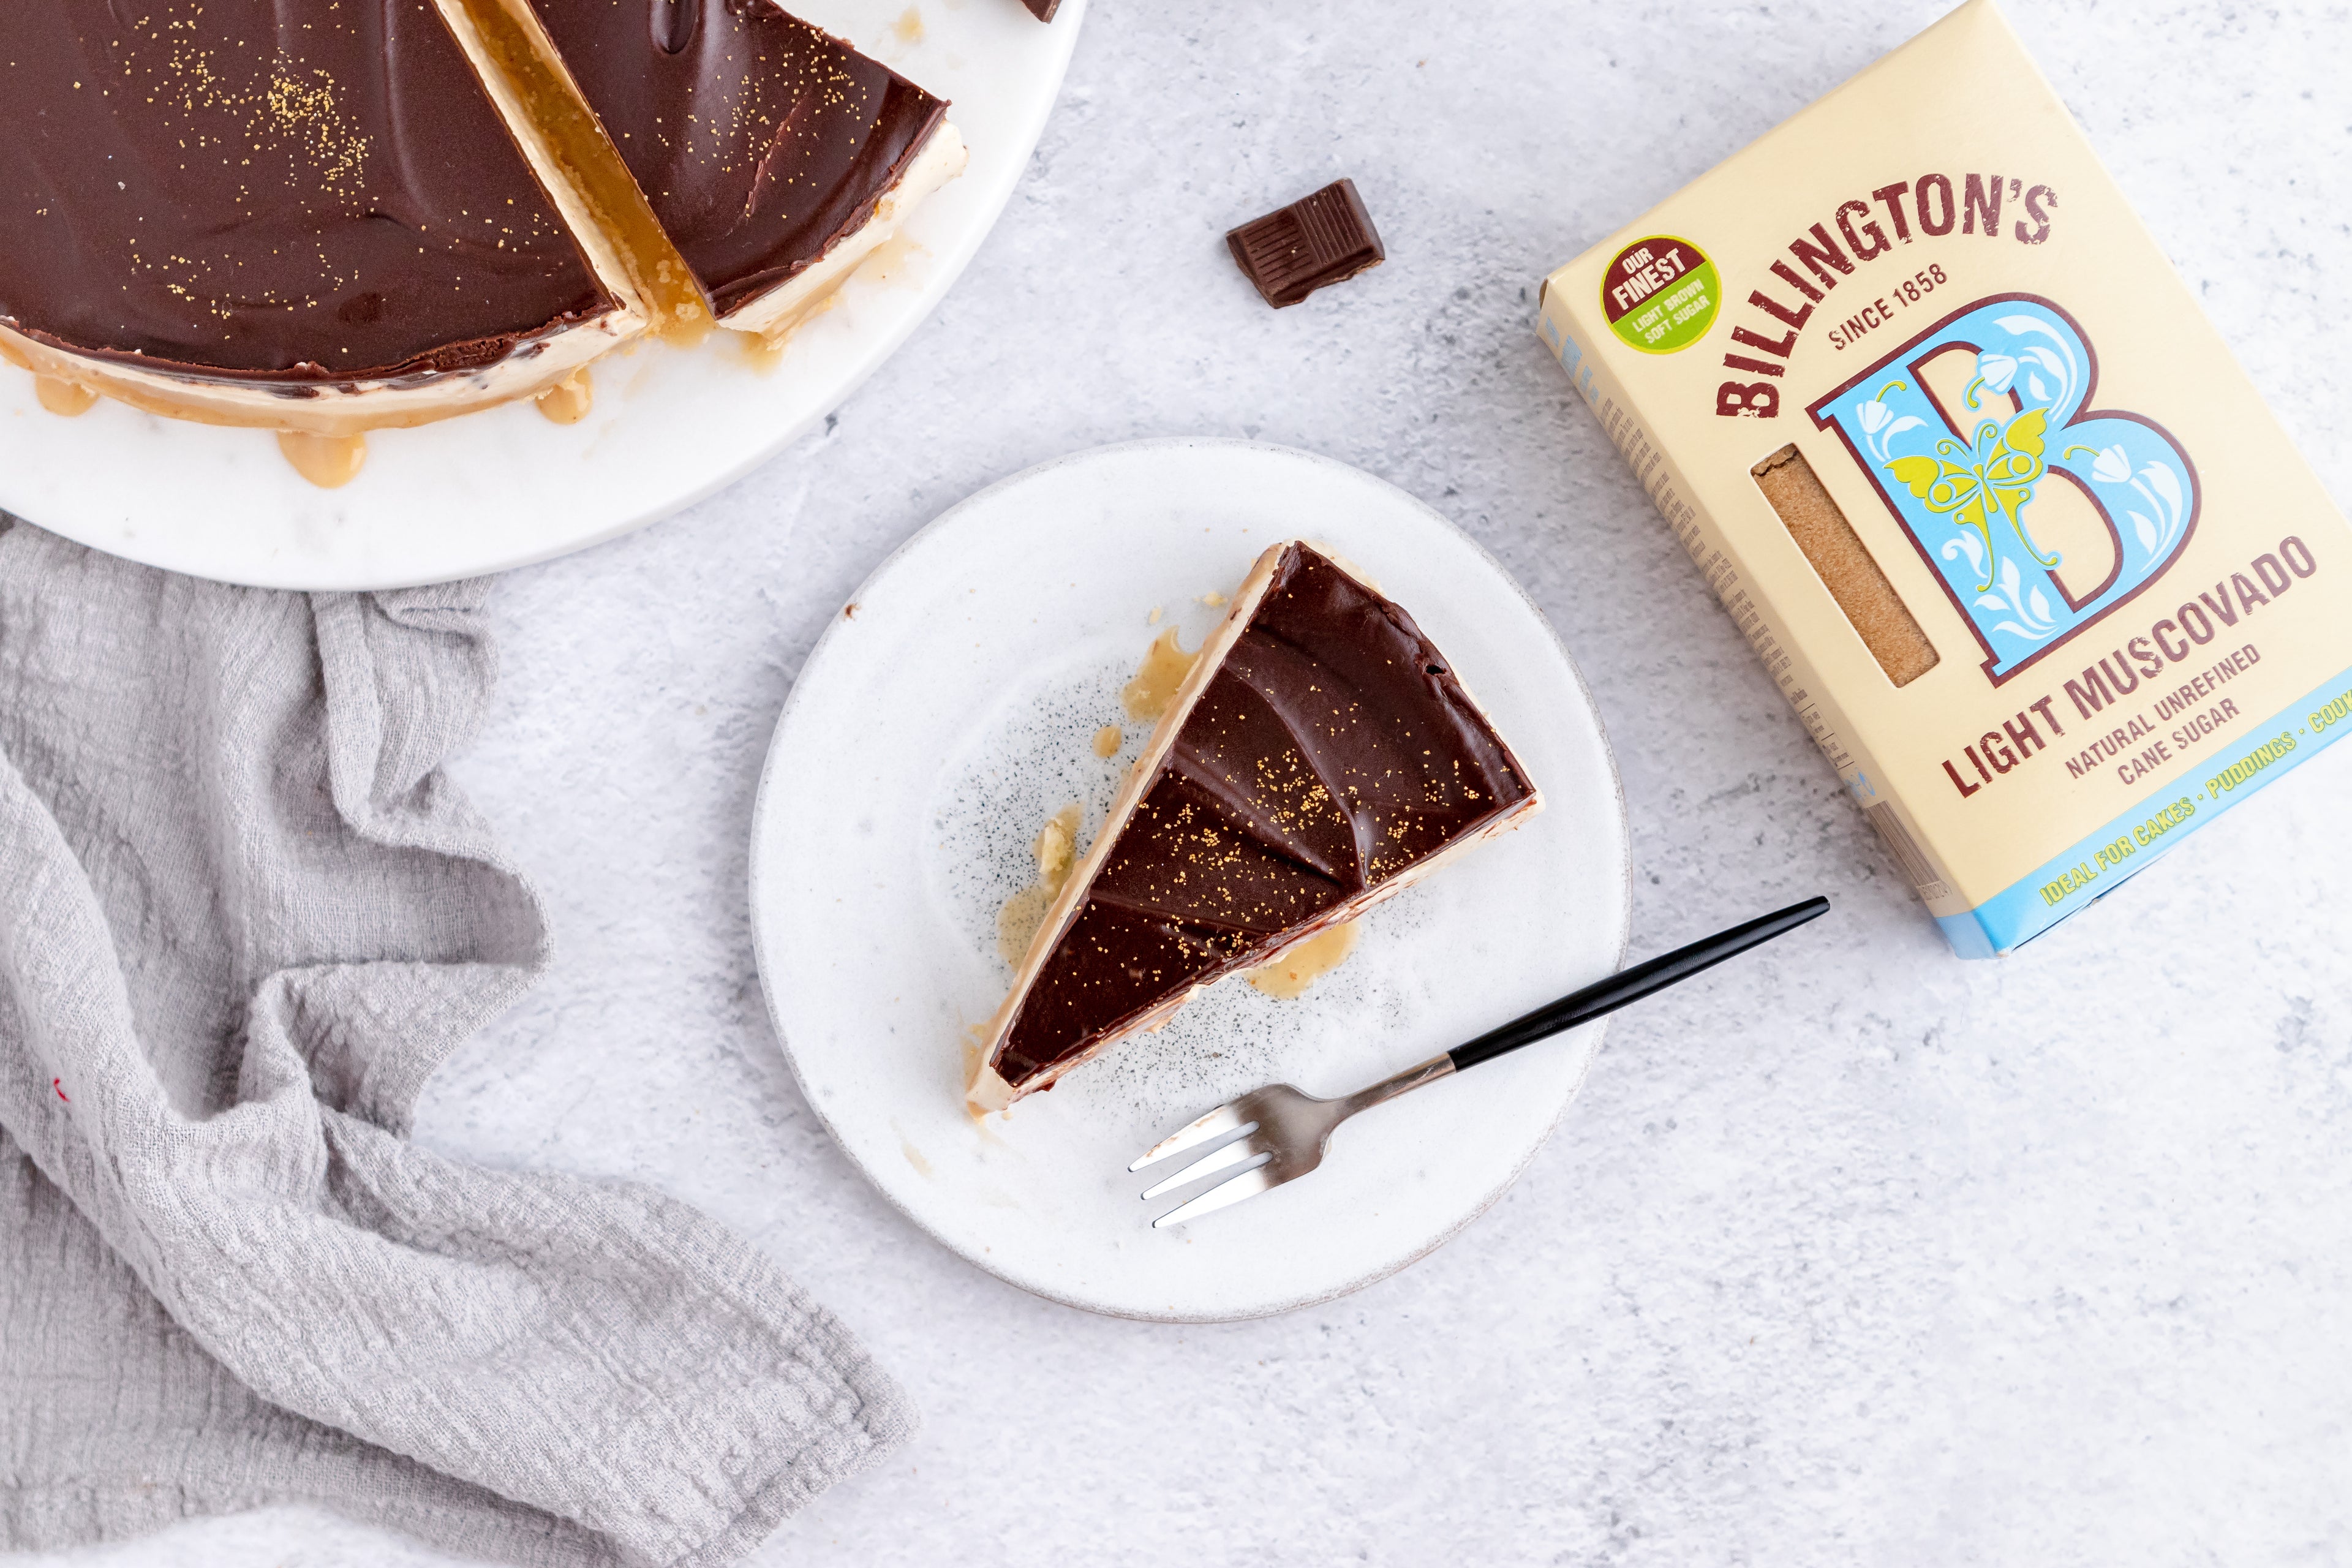 Millionaire's Cheesecake slice with a fork next to a box of Billington's Light Muscovado sugar